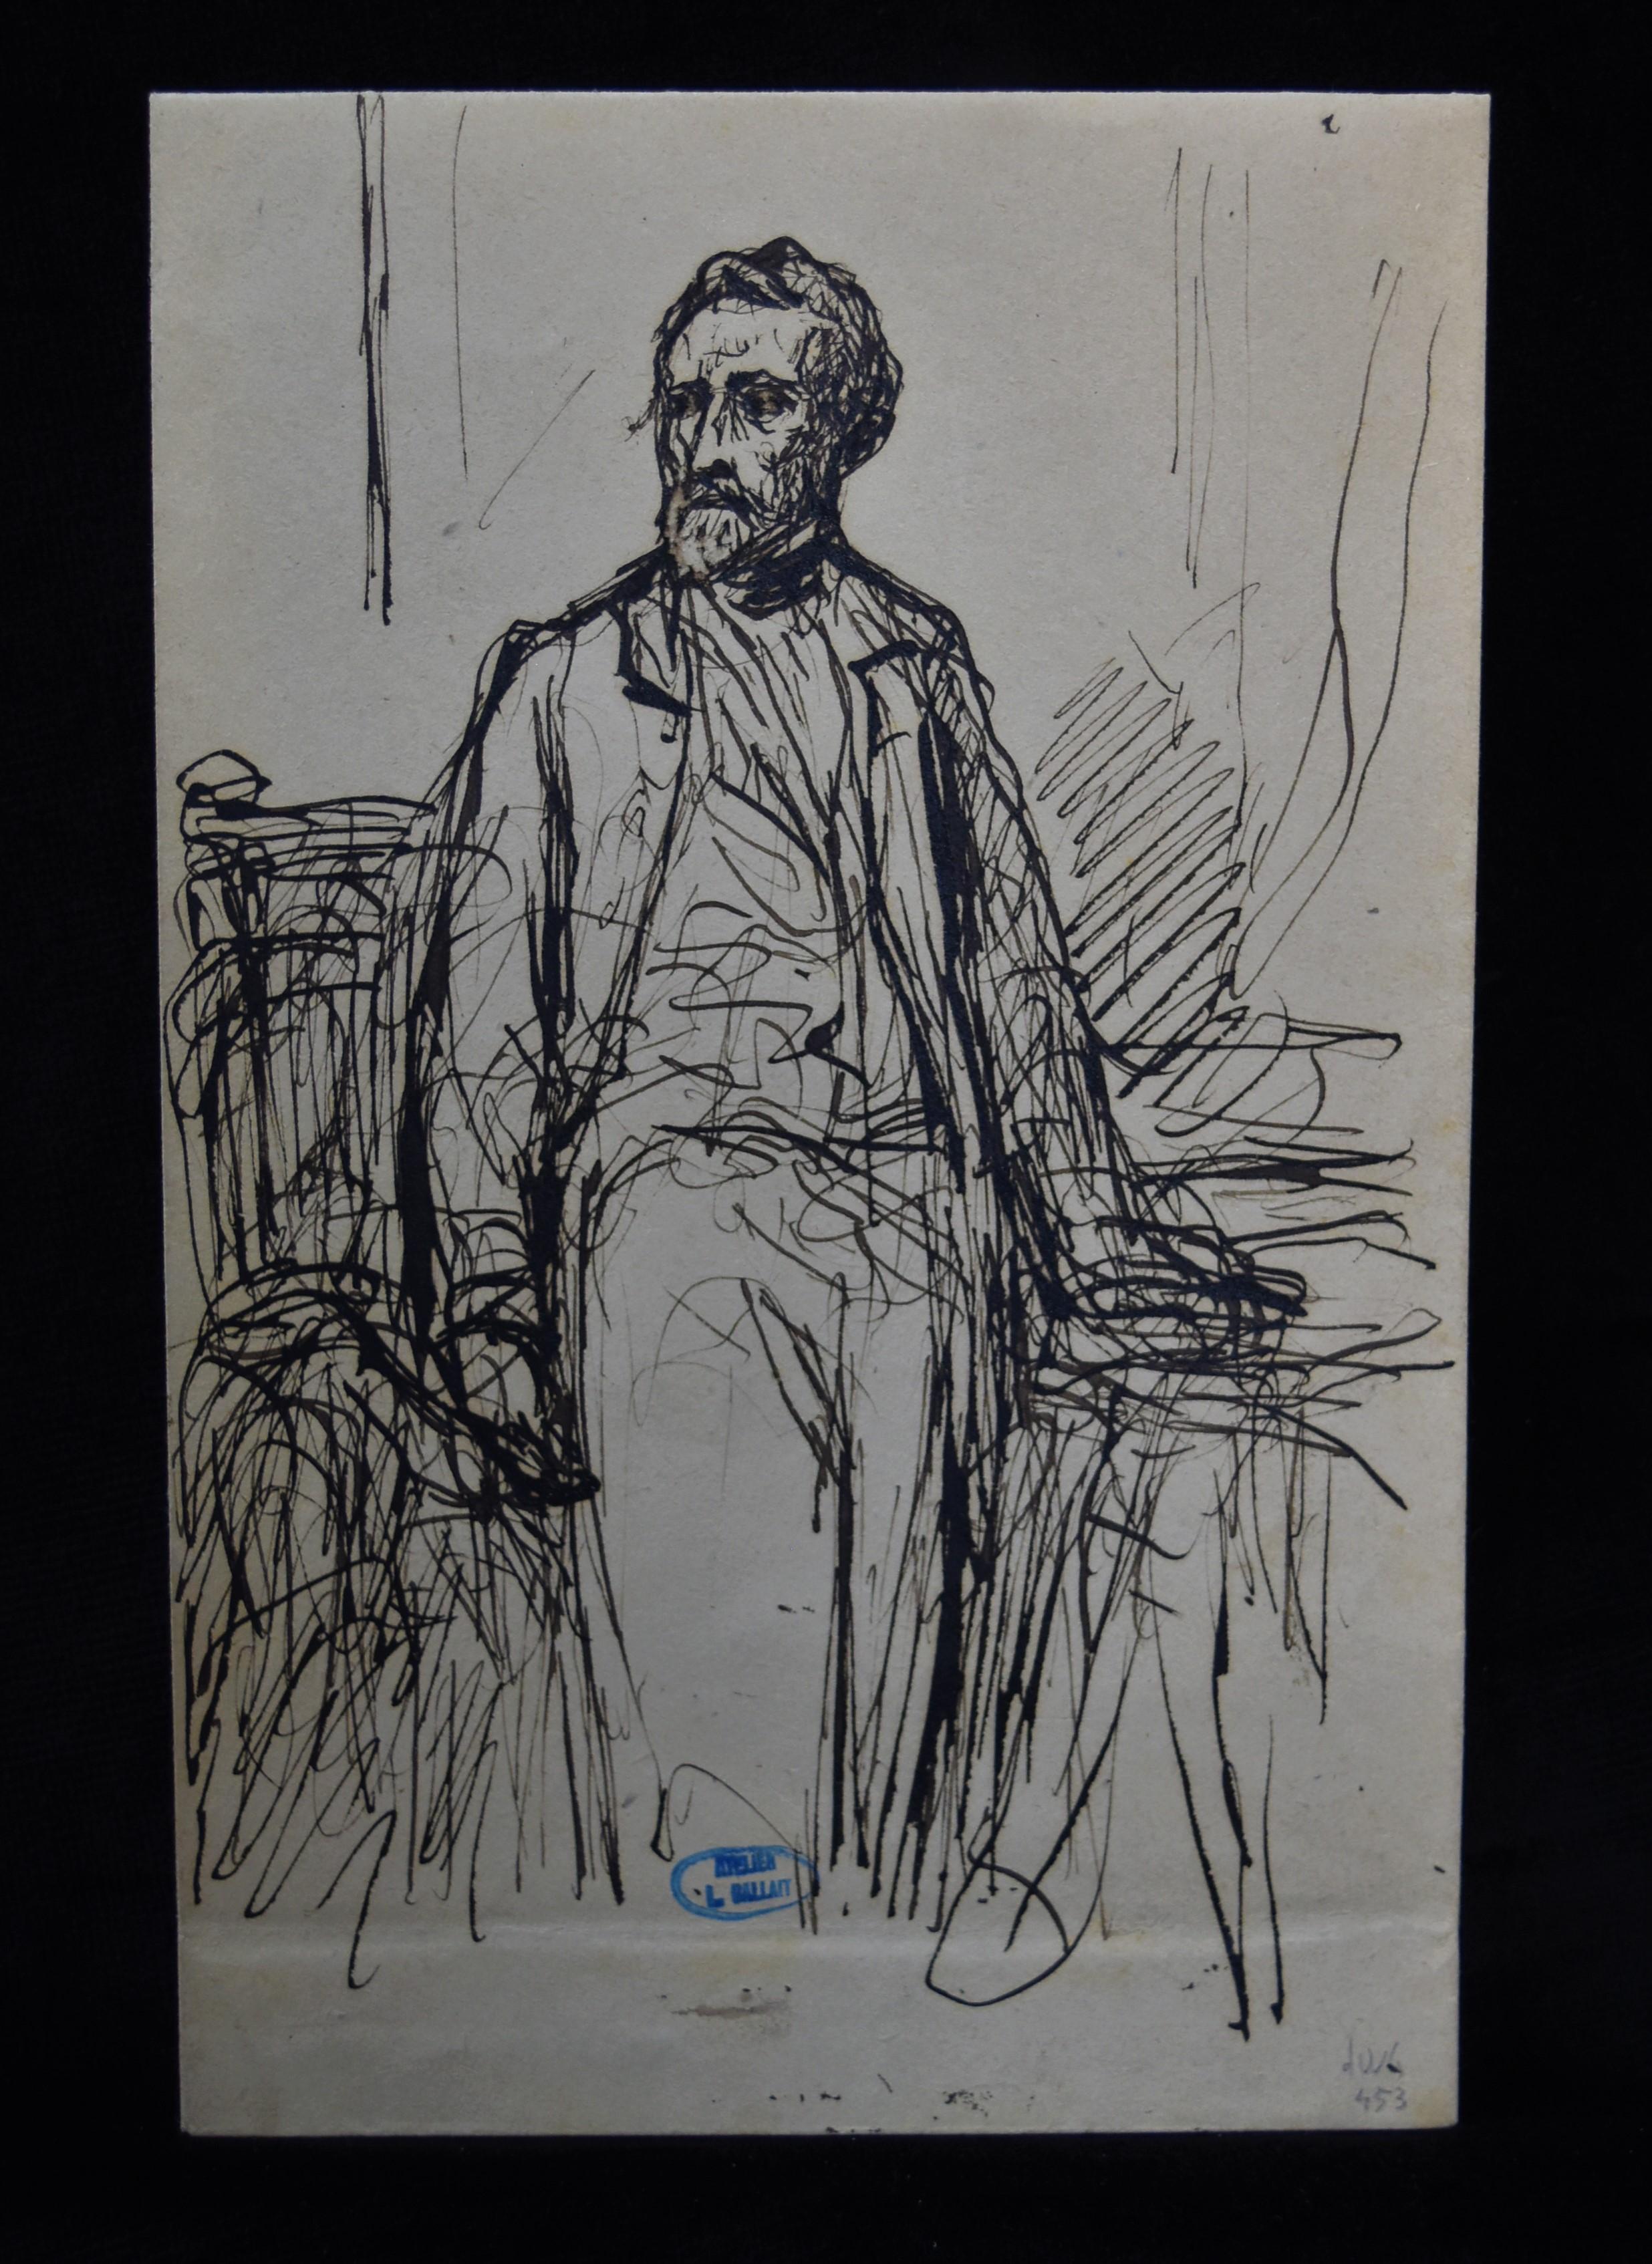 Louis Gallait (1810-1887)
Portrait of a Man, 
Pen and black ink on paper (an envelope)
21 x 13.5 cm
Pen and black ink on paper,  an envelope 
 
Provenance : Family of the Artist

A real sketch as the artist used the first thing he had under his